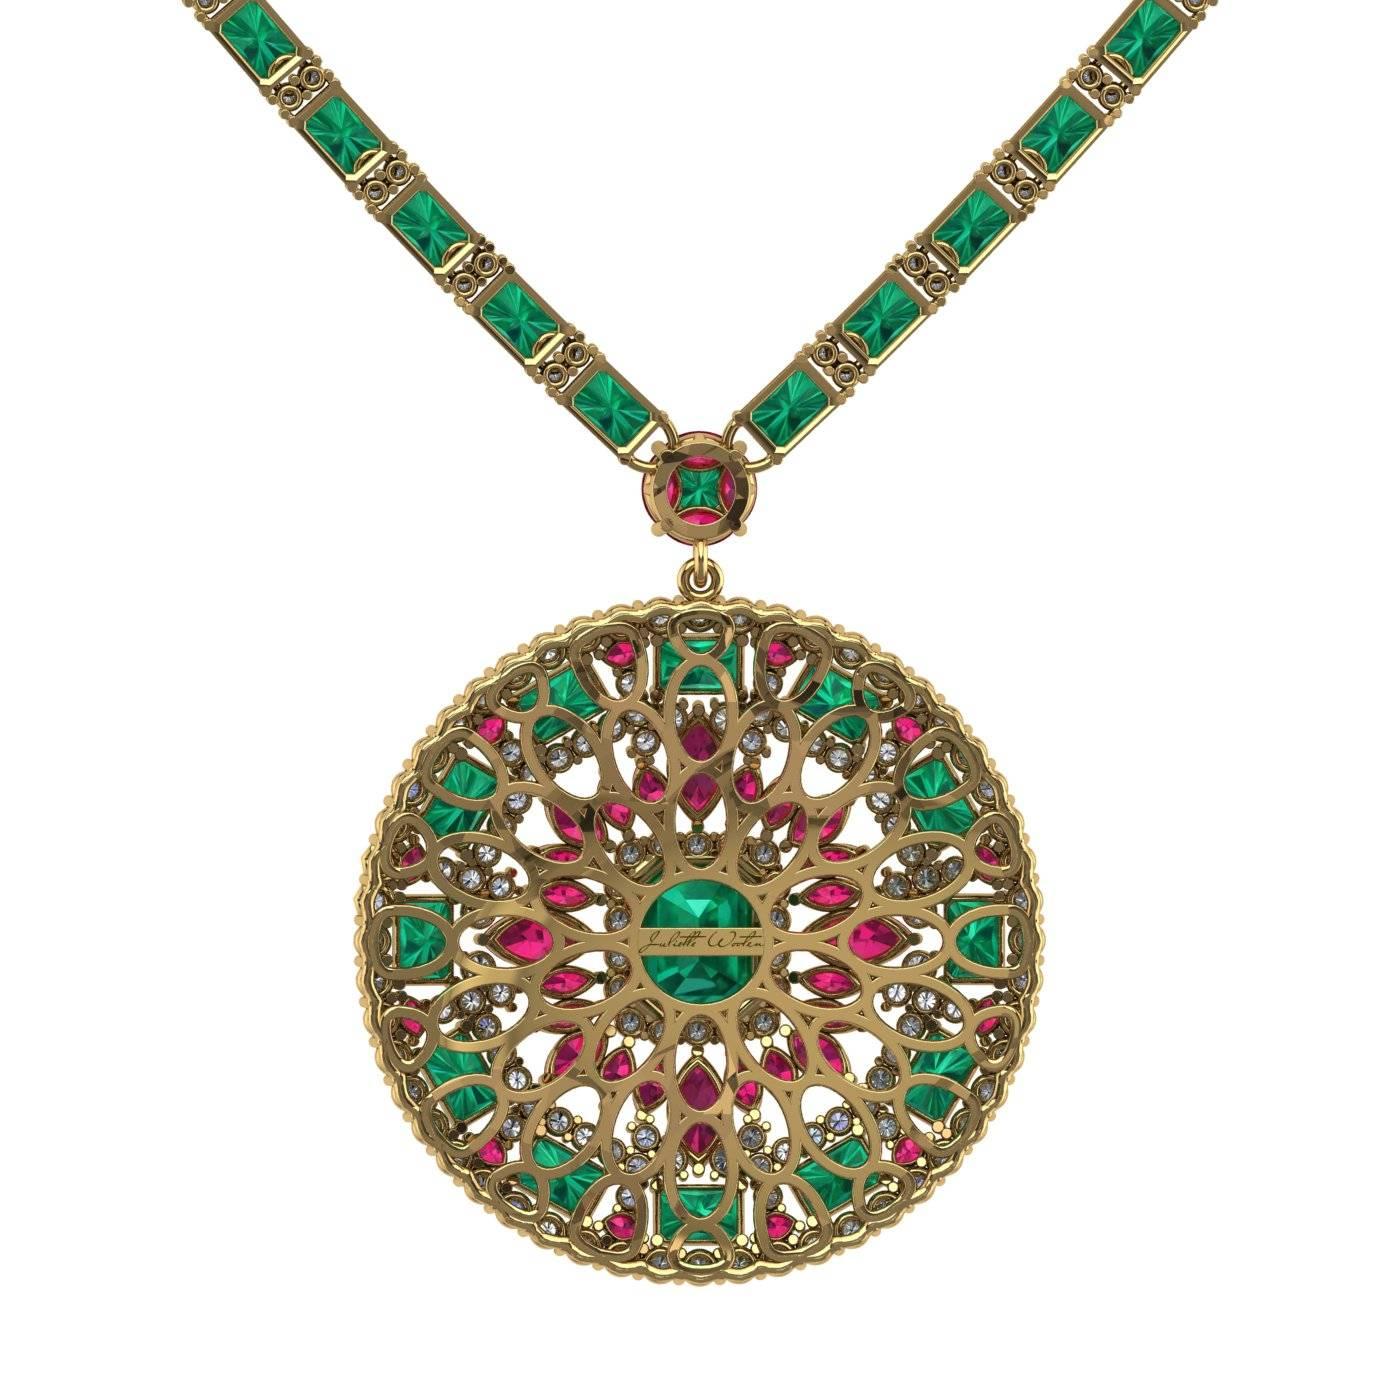 INTRODUCING NEW COLLECTION LA MAGIE

Emerald is the sacred gem of the world. It is symbolizing life, rejuvenation and balance. Discover the natural beauty of this mysterious gemstone with our chic and luxurious LA MAGIE collection. This necklace is